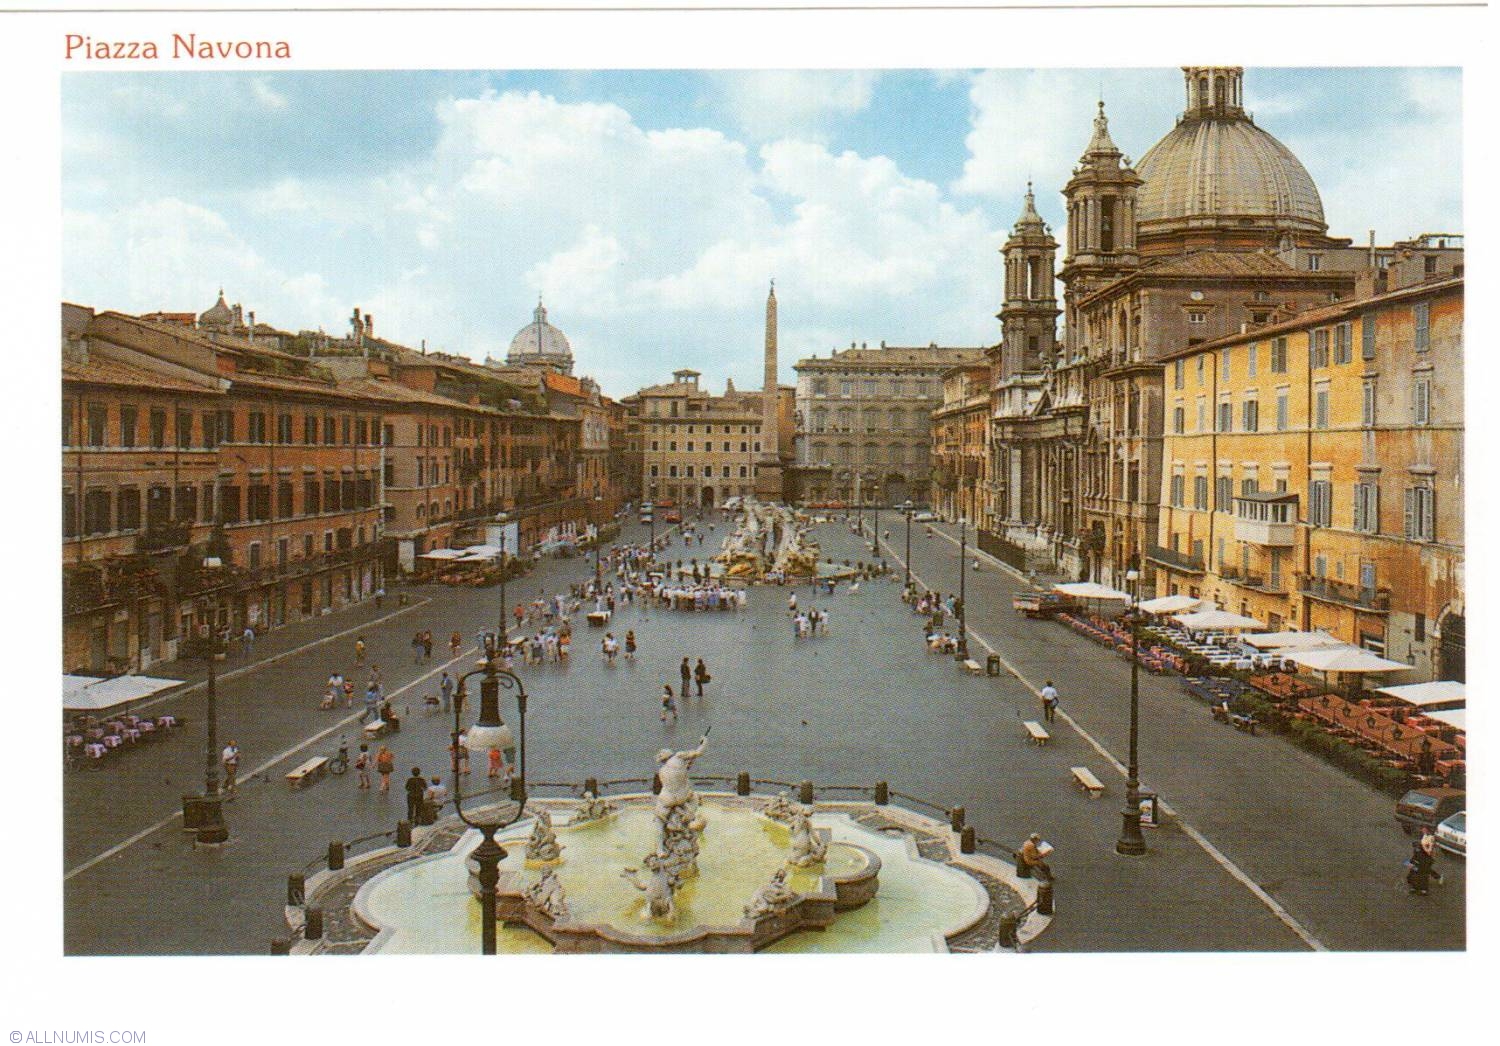 Rome - Piazza Navona, Rome and Vatican city - Italy - Postcard - 18596